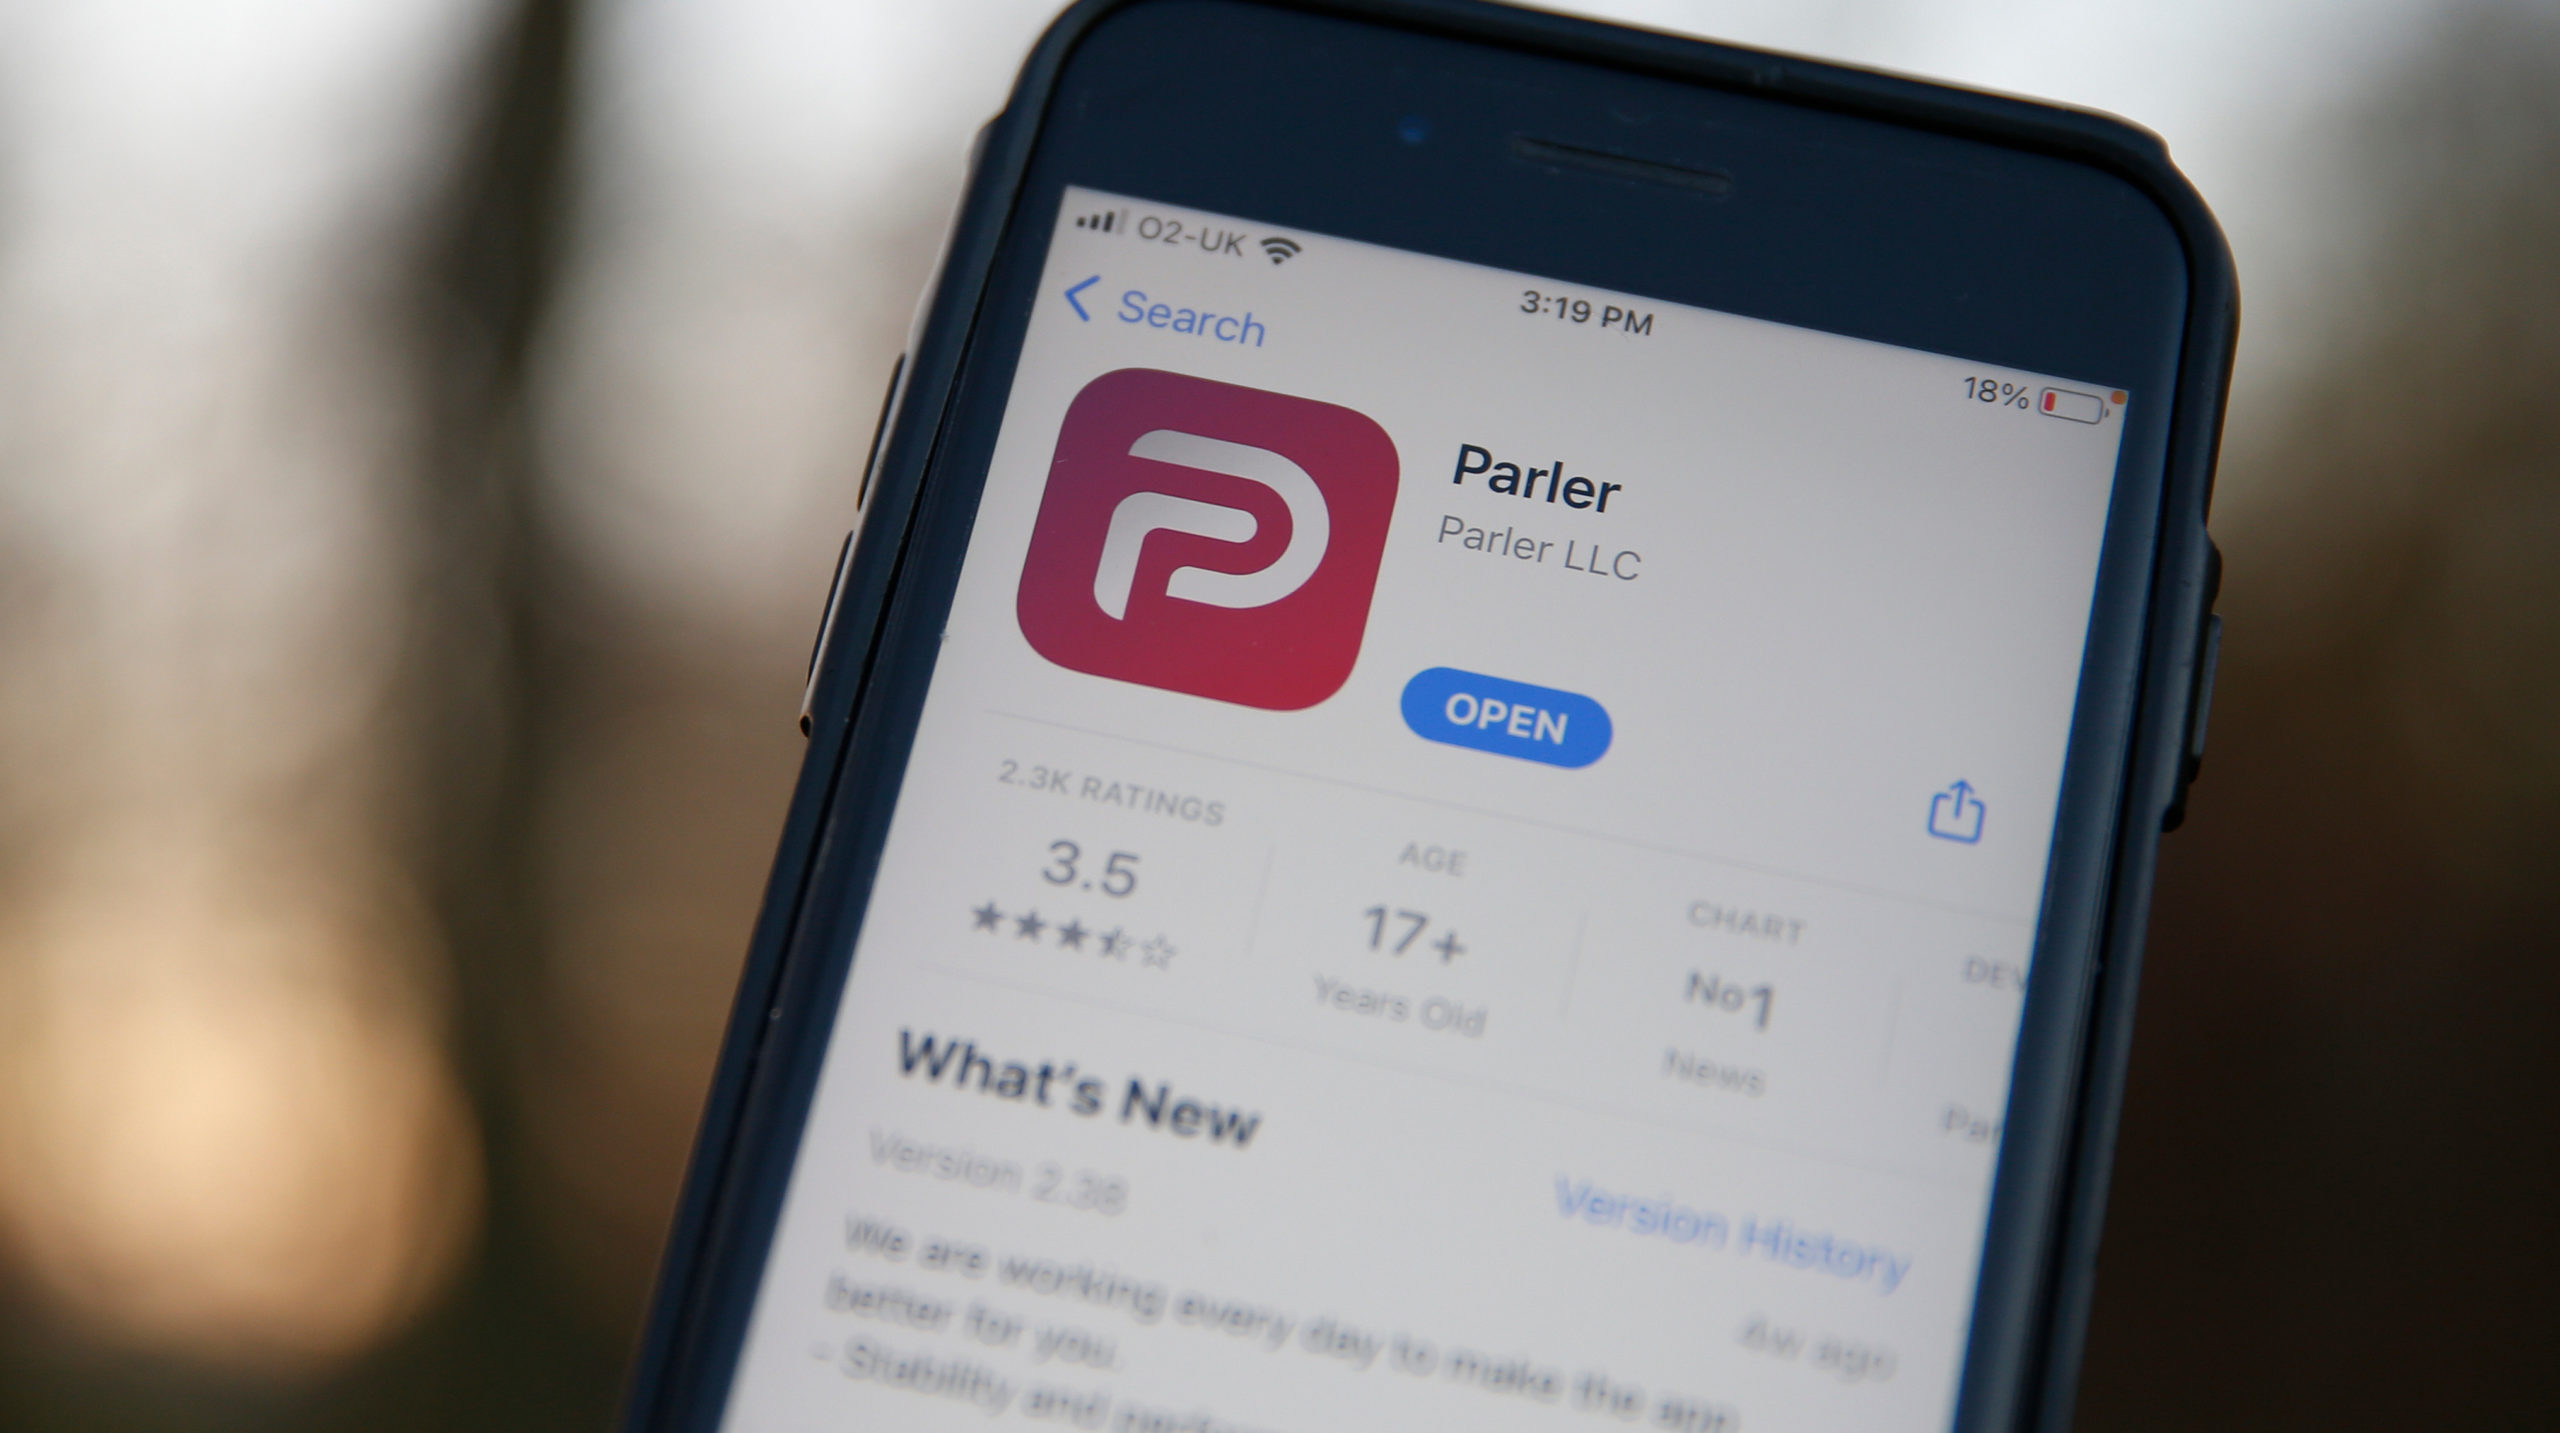 Parler was targeted by a group of hacktivists in 2021.